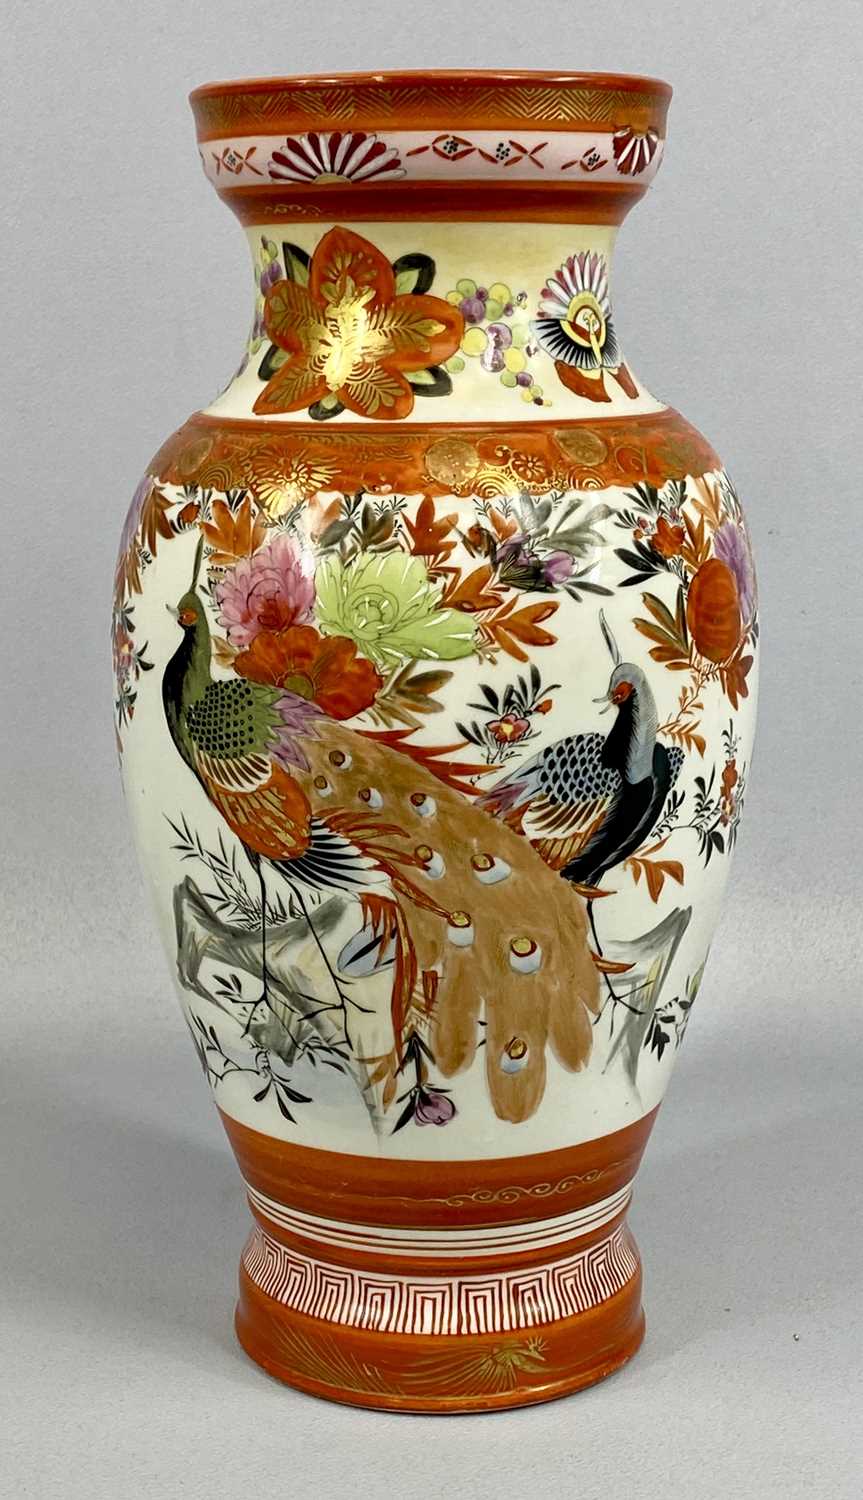 JAPANESE KUTANI VASES A PAIR, late 19th century, decorated with exotic birds and flowers, signed - Image 4 of 4